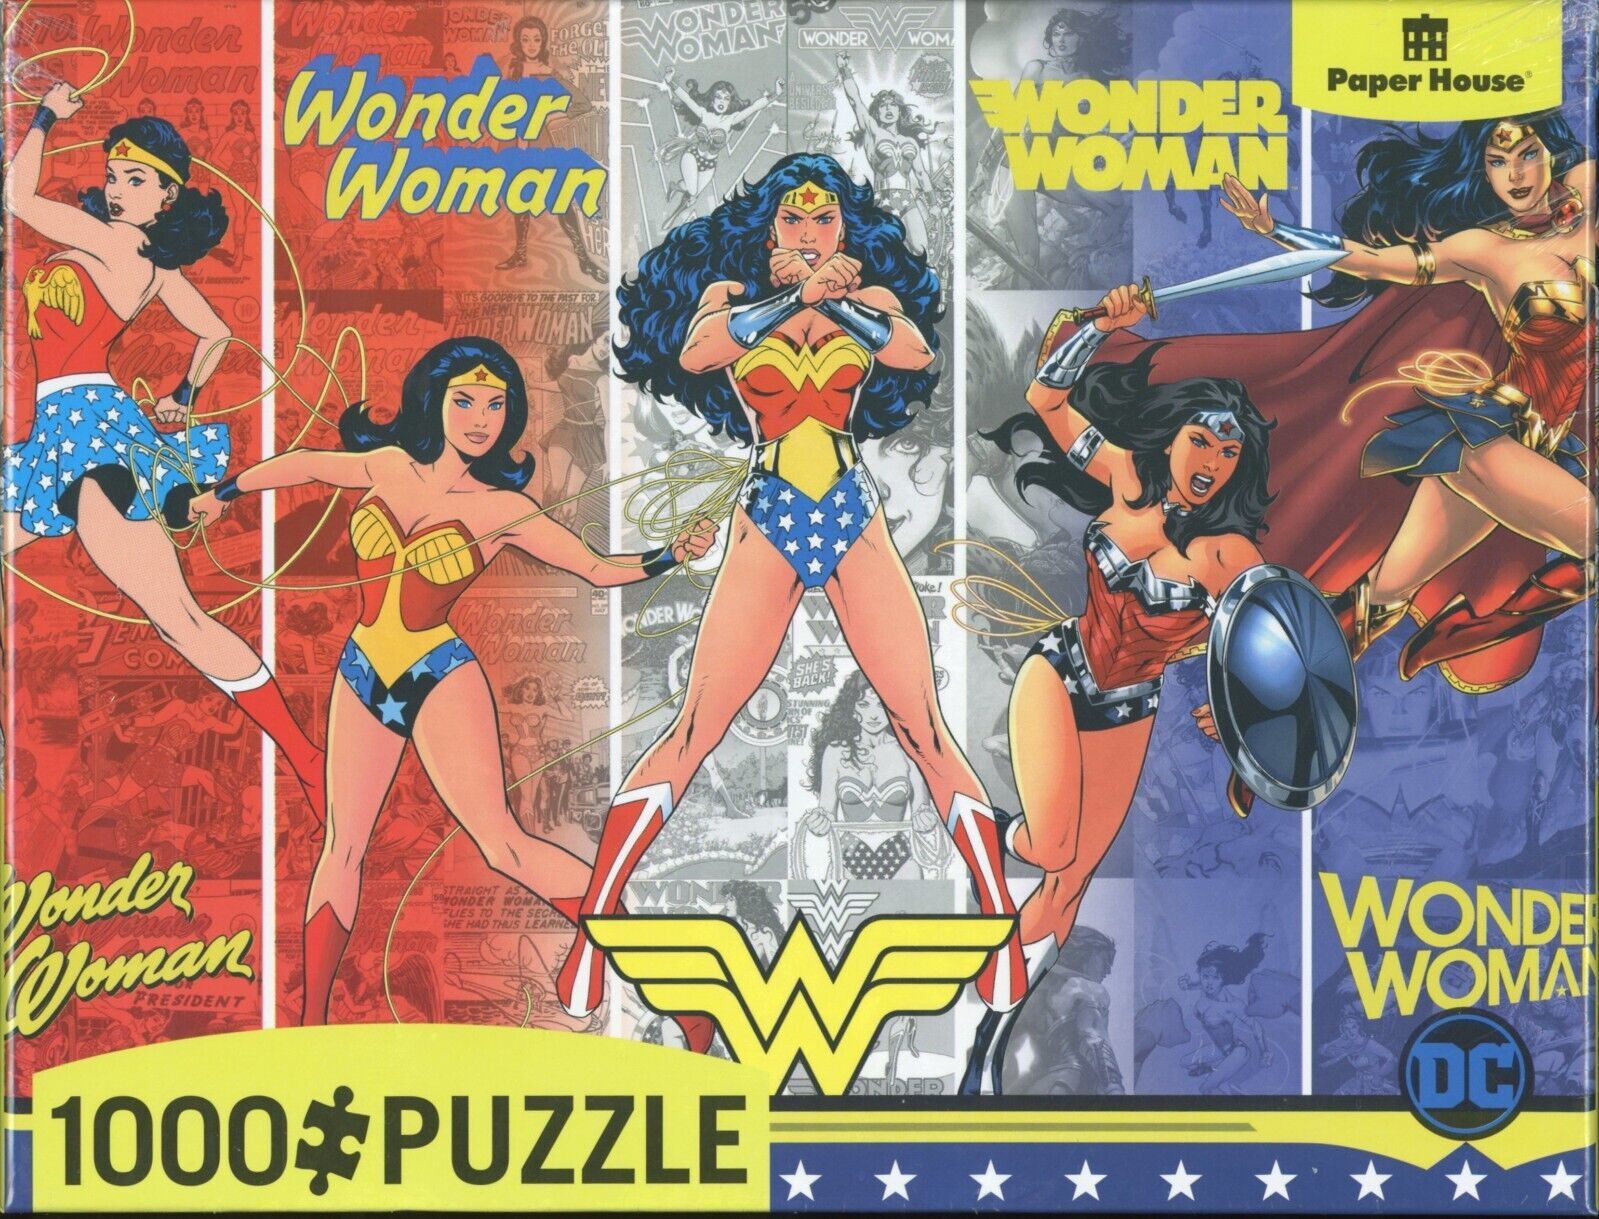 Primary image for Paper House Wonder Woman 1000 pc Jigsaw Puzzle Movie TV Tie-in DC Comics